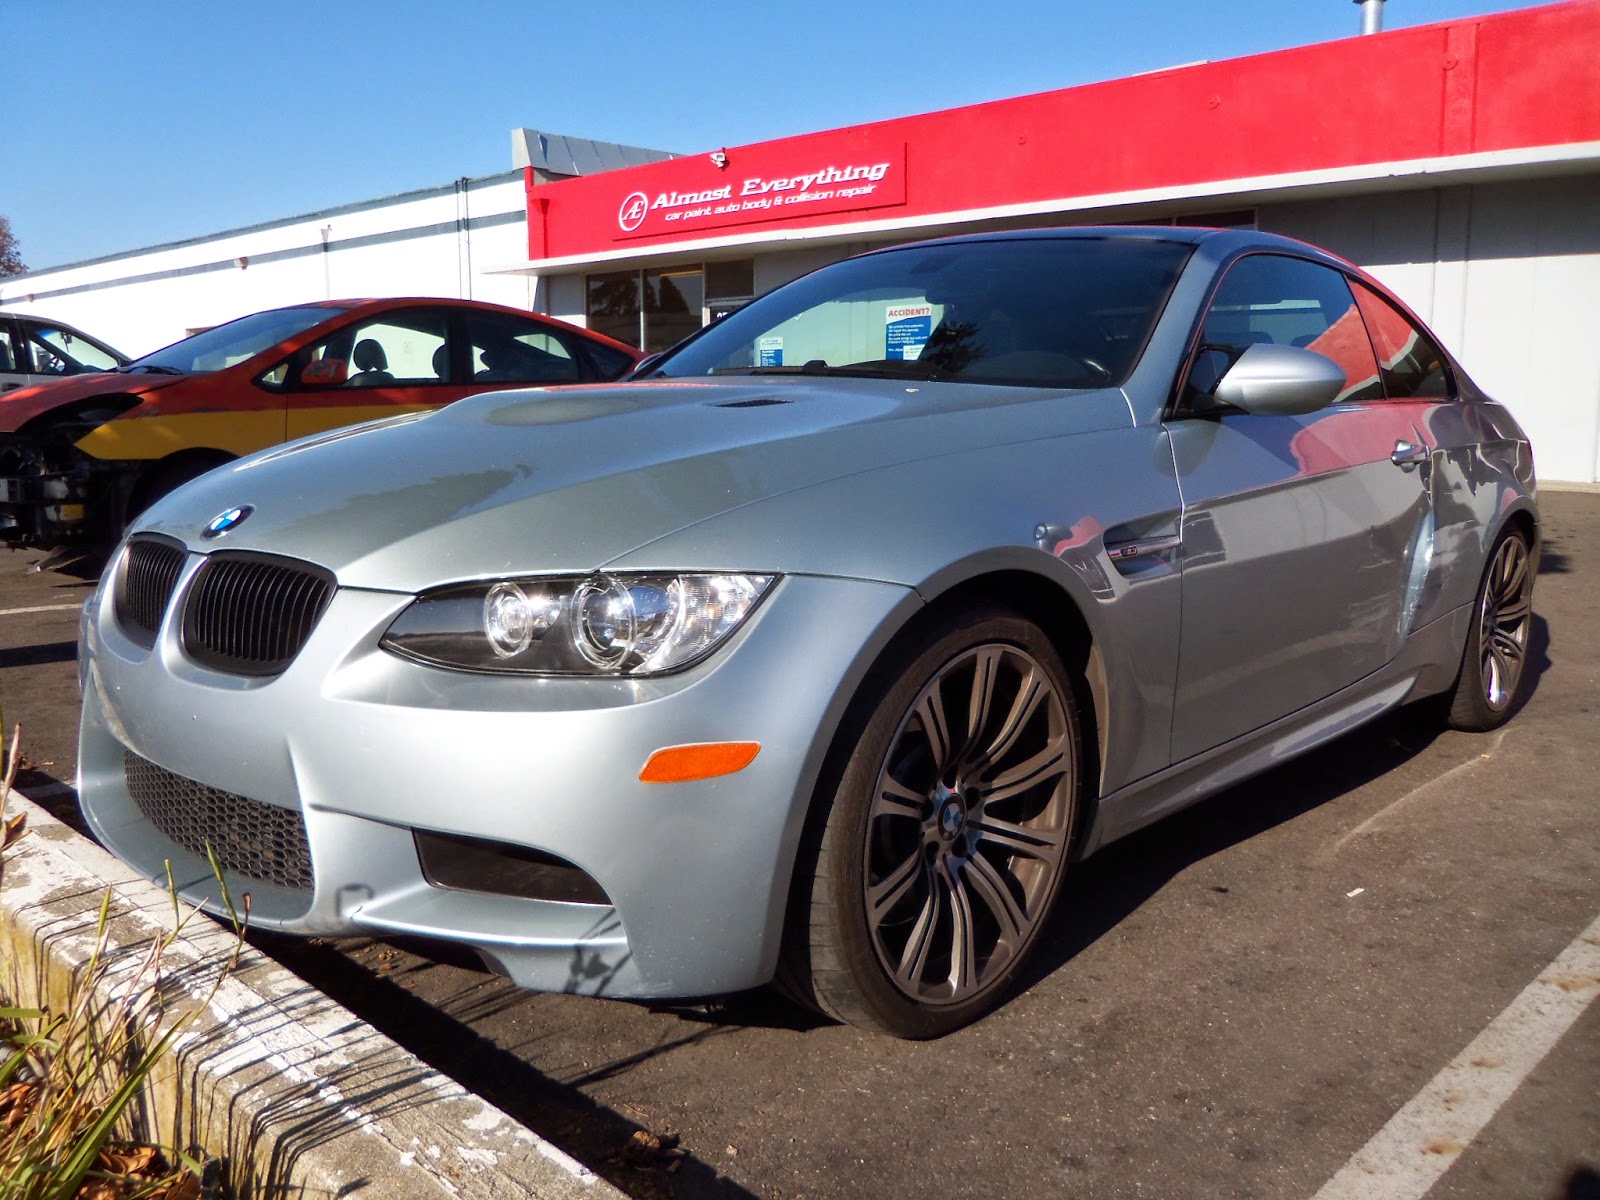 BMW M3 before Collision Repair at Almost Everything Auto Body